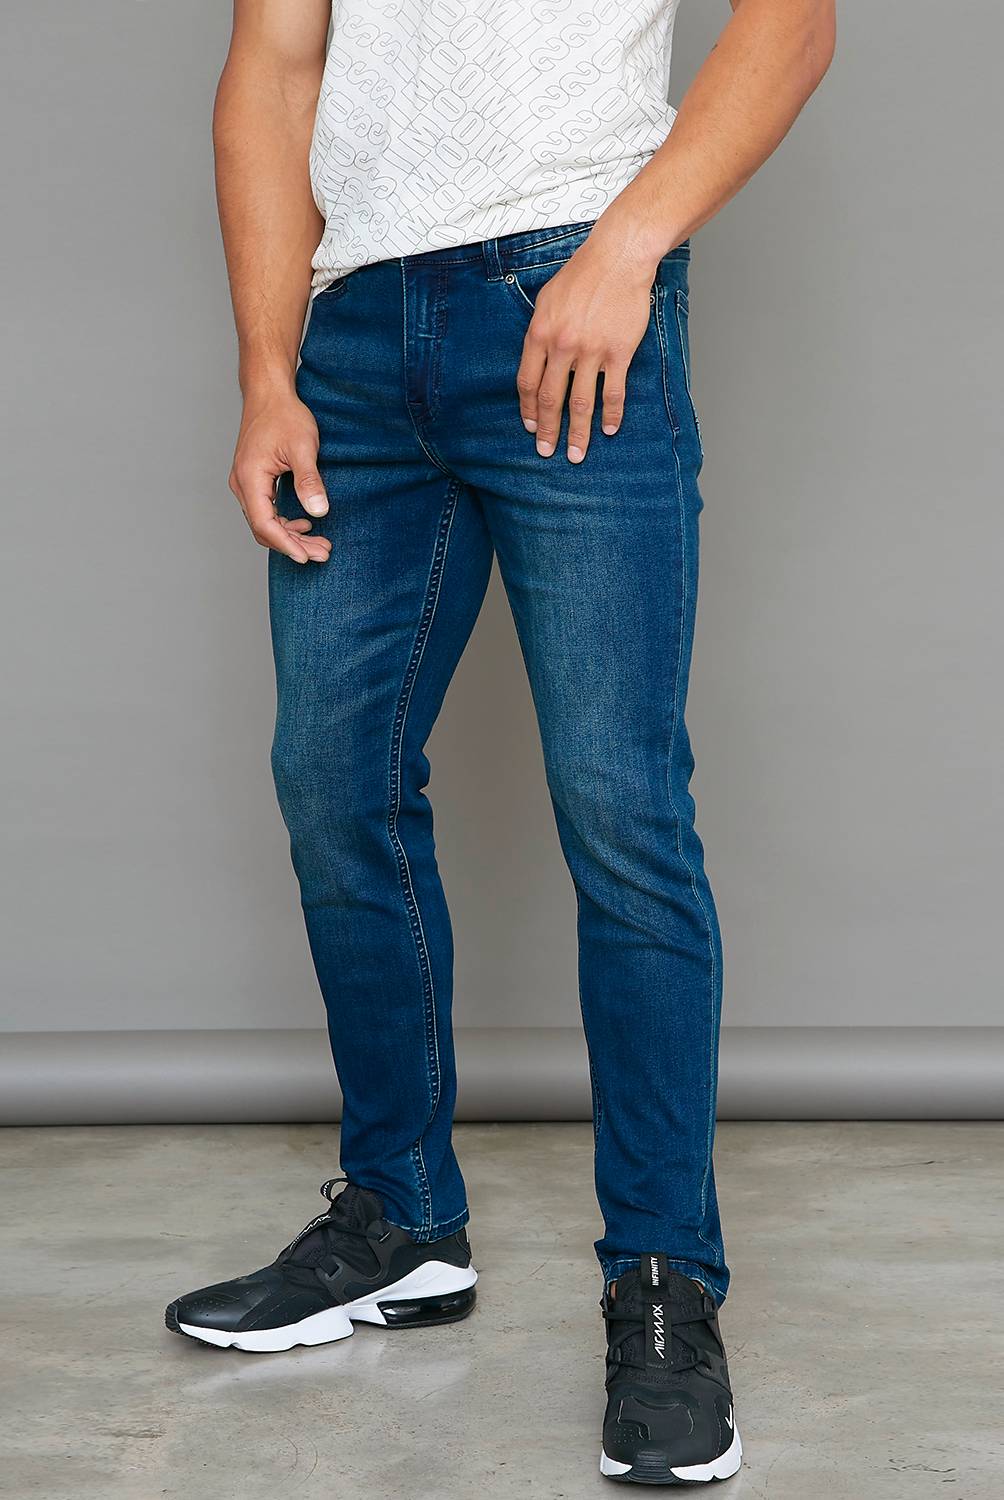 MOSSIMO - Mossimo Jeans Slim Fit Hombre